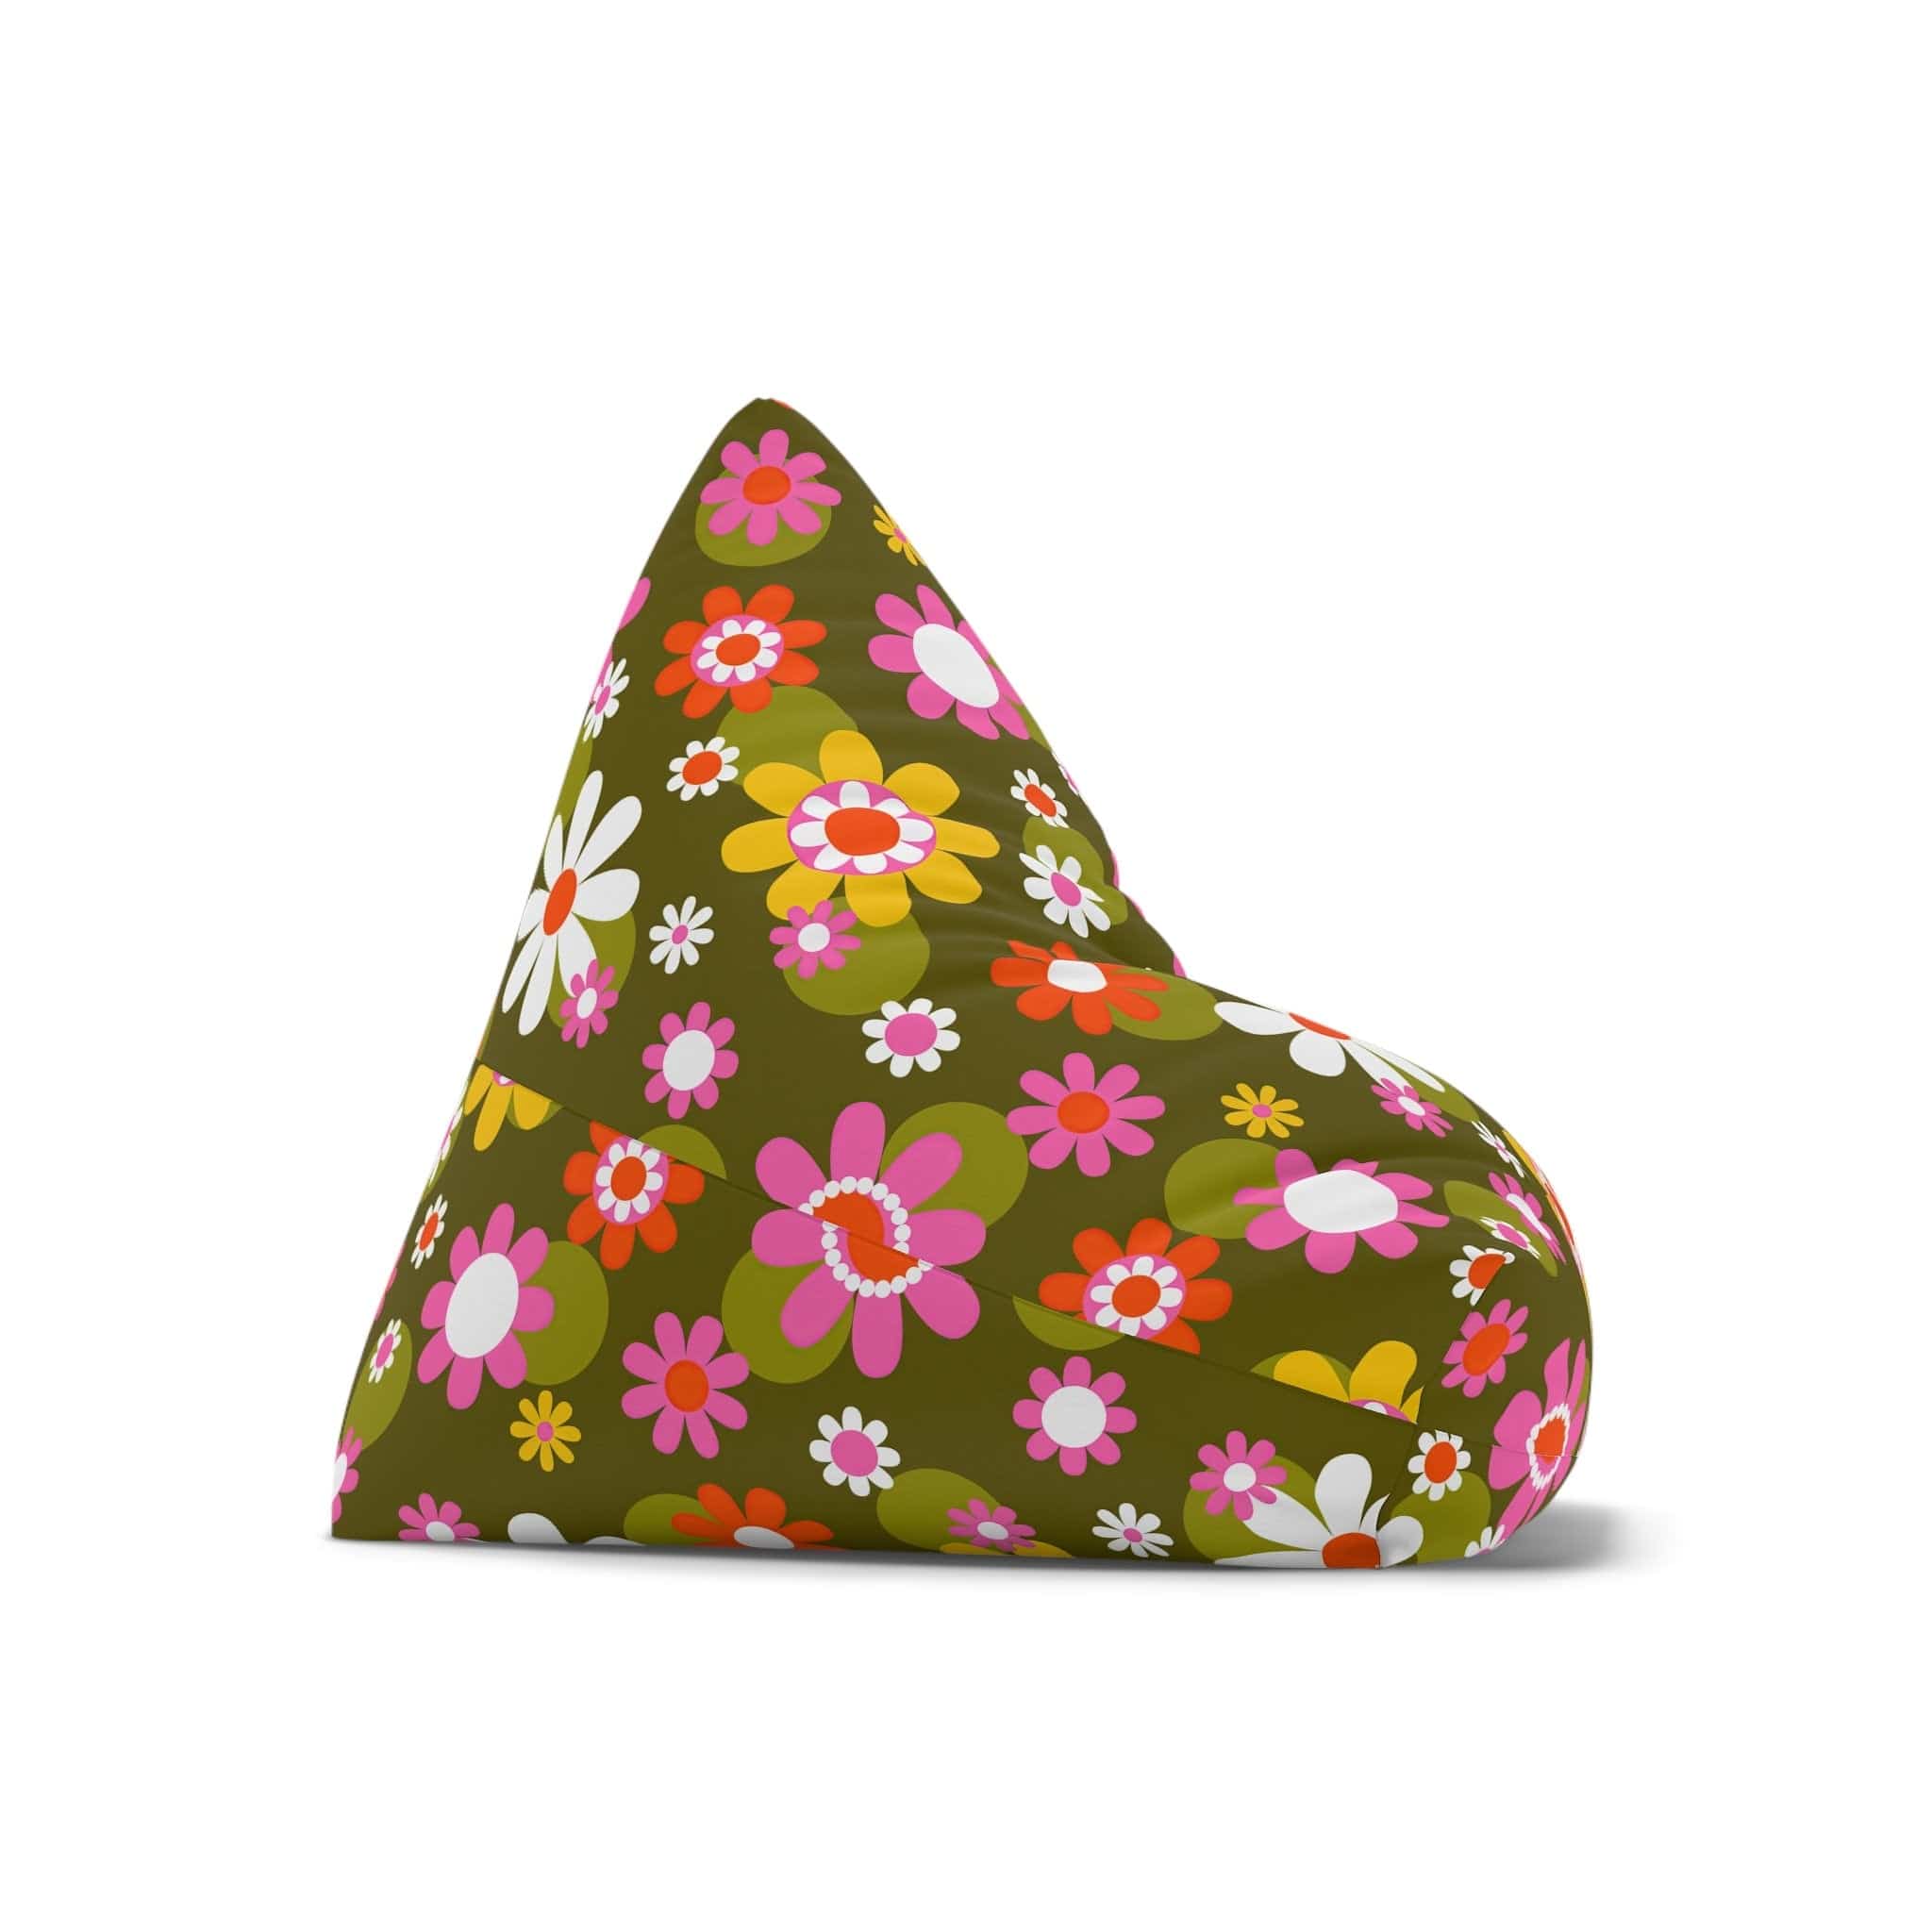 Kate McEnroe New York Retro Groovy Hippie Daisy Flower Power Bean Bag Chair Cover for Adult and Teens, Mid Century Dining Lounge Chair, 70s MCM Living Room DecorBean Bag Chair Covers28615237016422373352